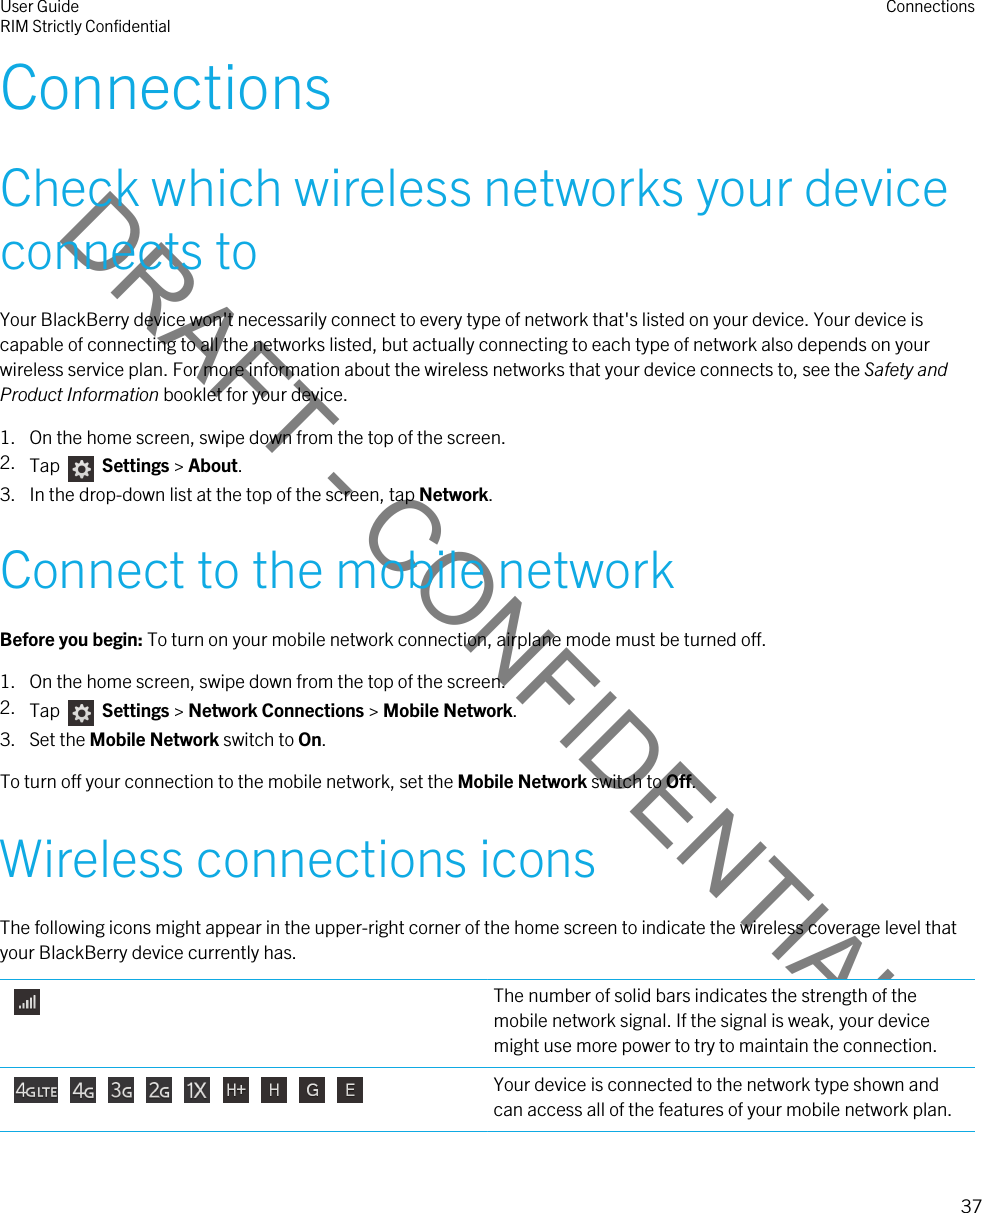 DRAFT - CONFIDENTIALConnectionsCheck which wireless networks your device connects toYour BlackBerry device won&apos;t necessarily connect to every type of network that&apos;s listed on your device. Your device is capable of connecting to all the networks listed, but actually connecting to each type of network also depends on your wireless service plan. For more information about the wireless networks that your device connects to, see the Safety and Product Information booklet for your device.1. On the home screen, swipe down from the top of the screen.2. Tap    Settings &gt; About.3. In the drop-down list at the top of the screen, tap Network.Connect to the mobile networkBefore you begin: To turn on your mobile network connection, airplane mode must be turned off.1. On the home screen, swipe down from the top of the screen.2. Tap    Settings &gt; Network Connections &gt; Mobile Network.3. Set the Mobile Network switch to On.To turn off your connection to the mobile network, set the Mobile Network switch to Off.Wireless connections iconsThe following icons might appear in the upper-right corner of the home screen to indicate the wireless coverage level that your BlackBerry device currently has. The number of solid bars indicates the strength of the mobile network signal. If the signal is weak, your device might use more power to try to maintain the connection.           Your device is connected to the network type shown and can access all of the features of your mobile network plan.User GuideRIM Strictly Confidential Connections37 